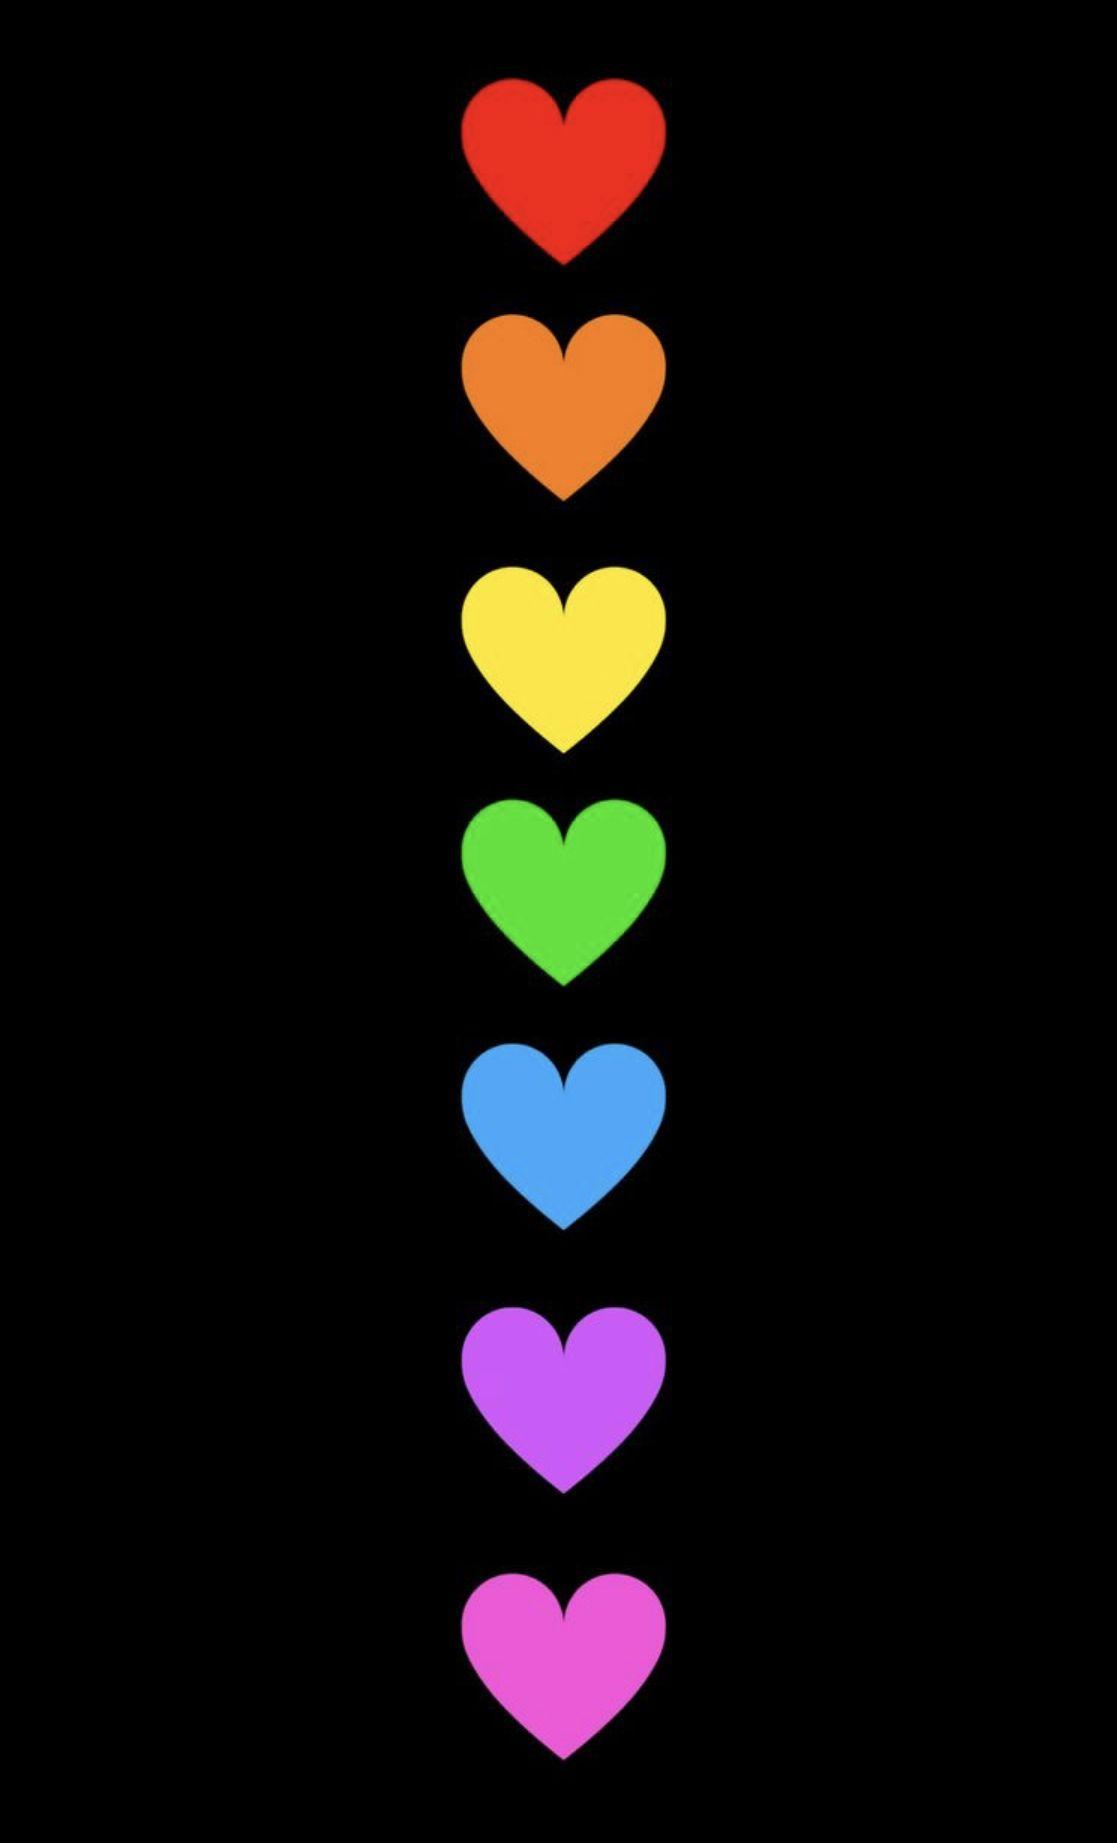 Colorful Hearts Wallpaper 64 pictures